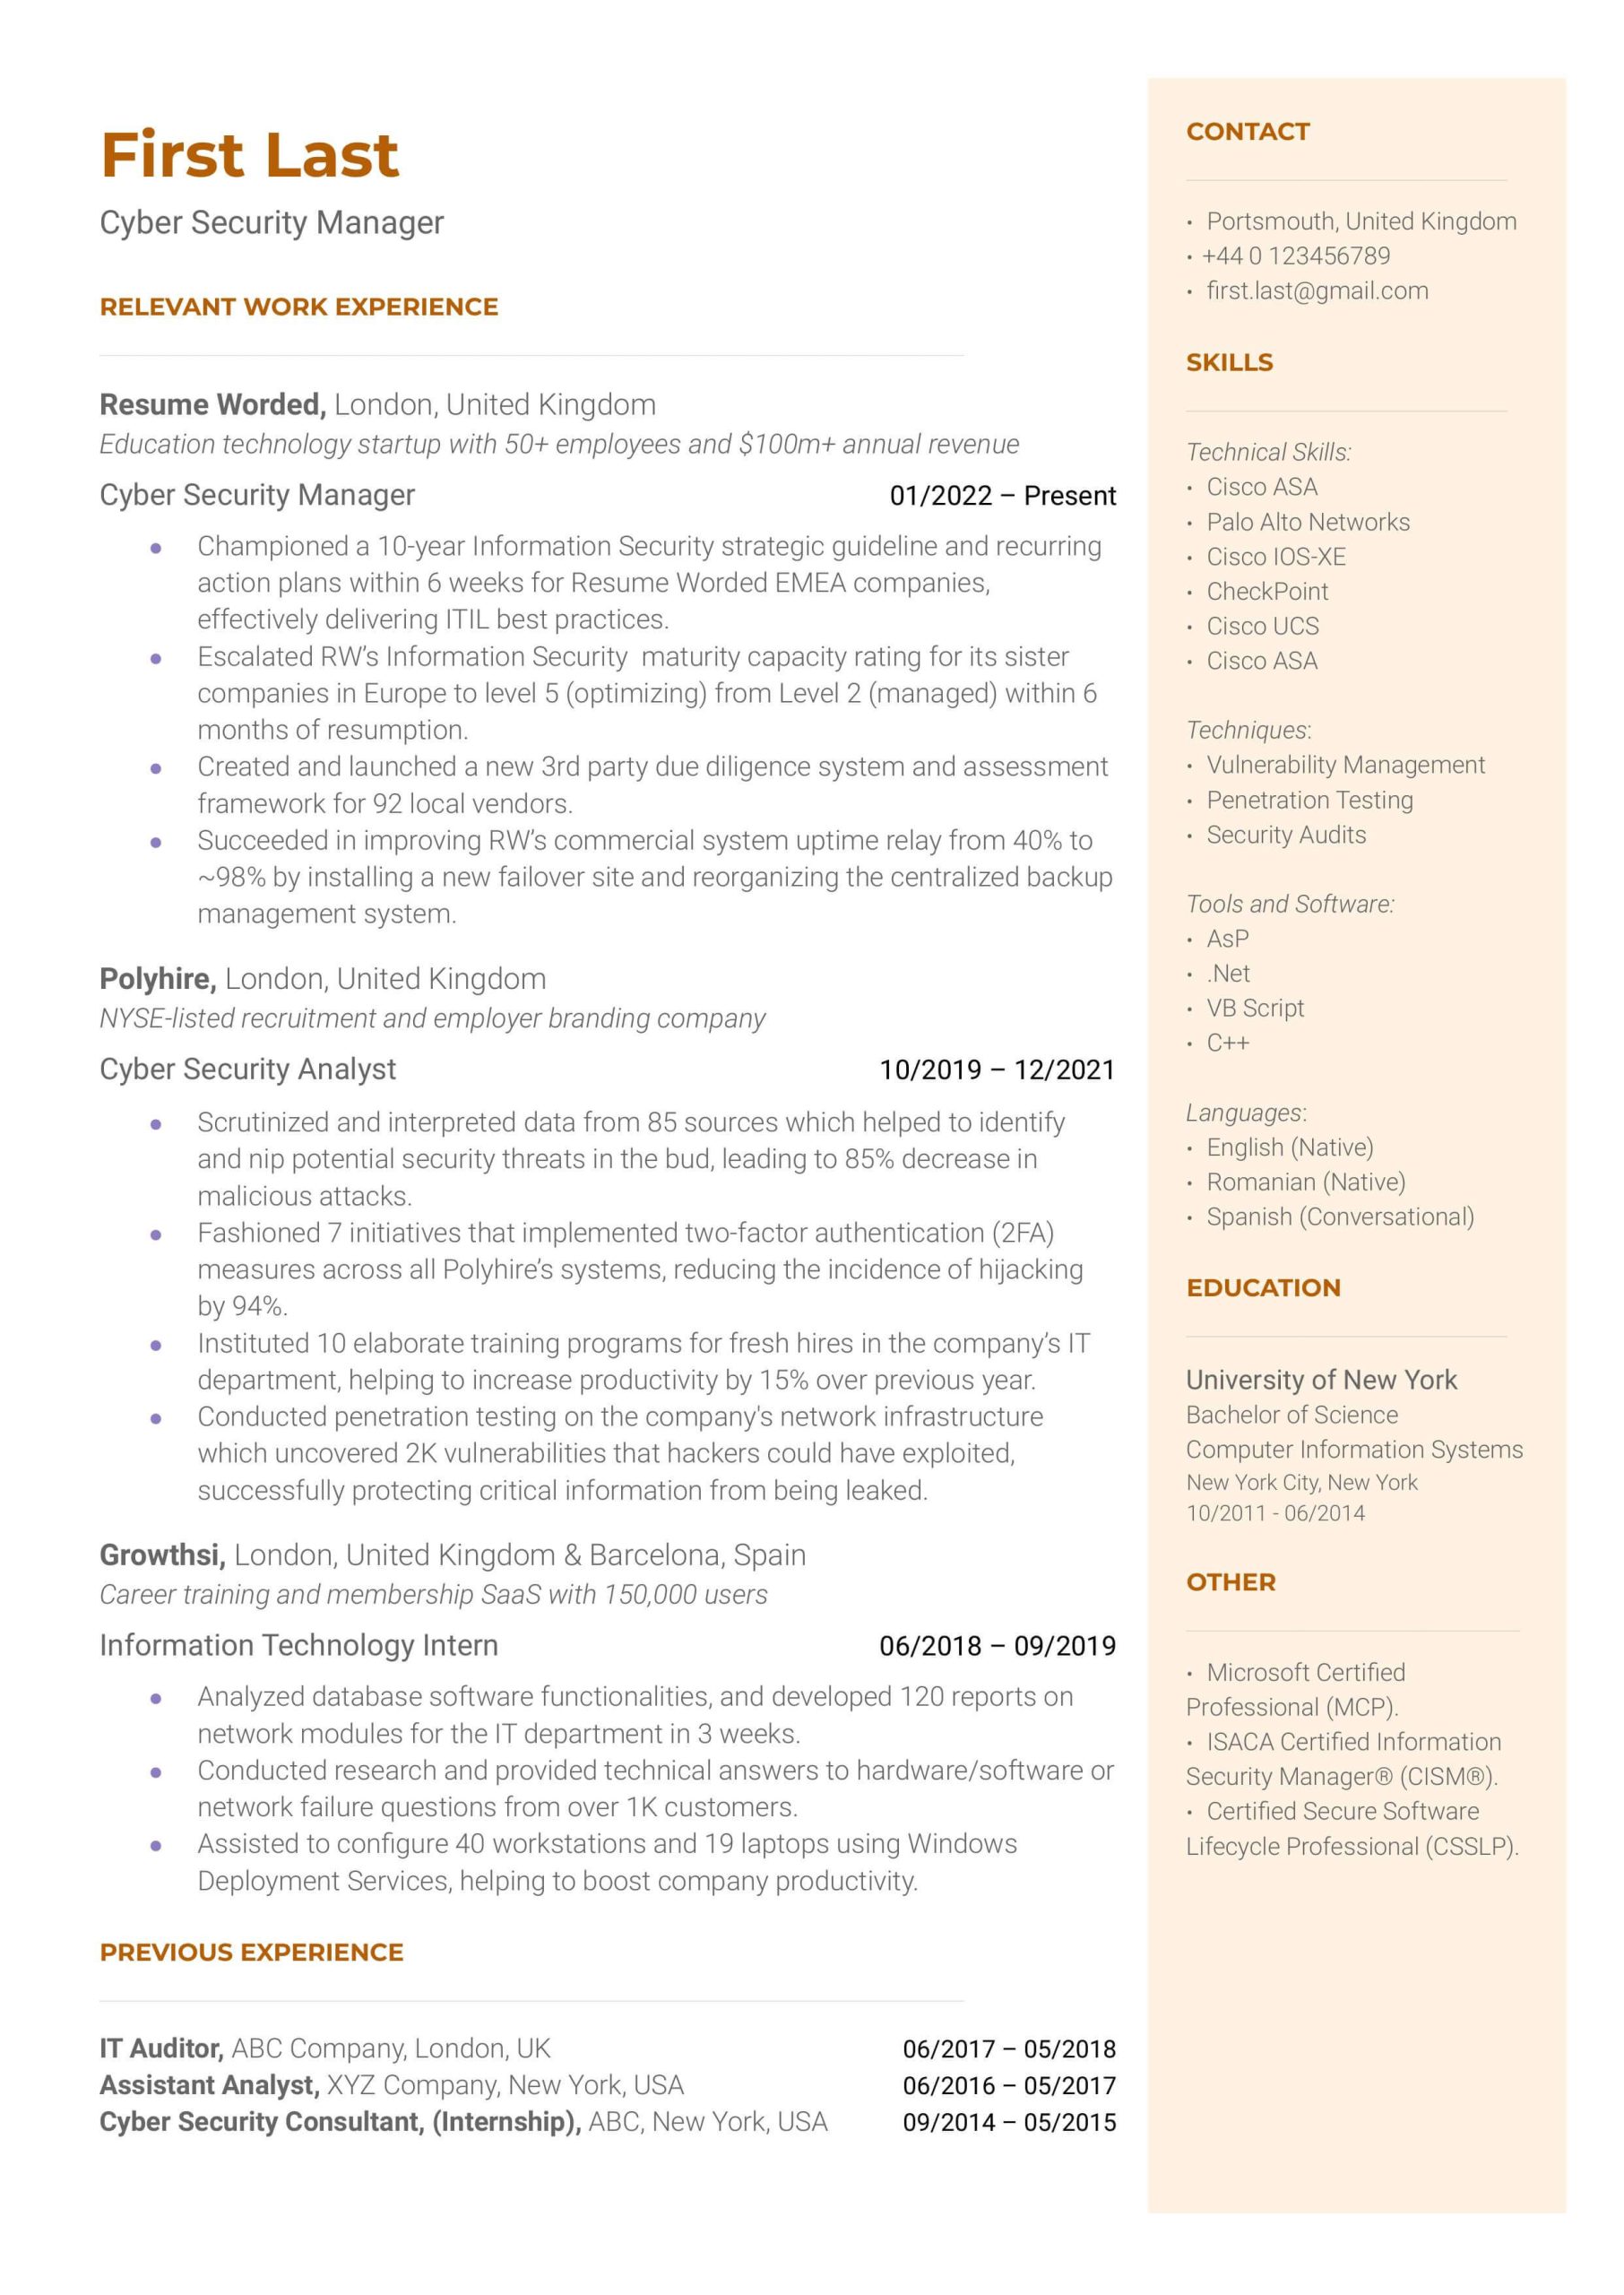 Sample Resume for It Security Analyst Cyber Security Manager Resume Example for 2022 Resume Worded